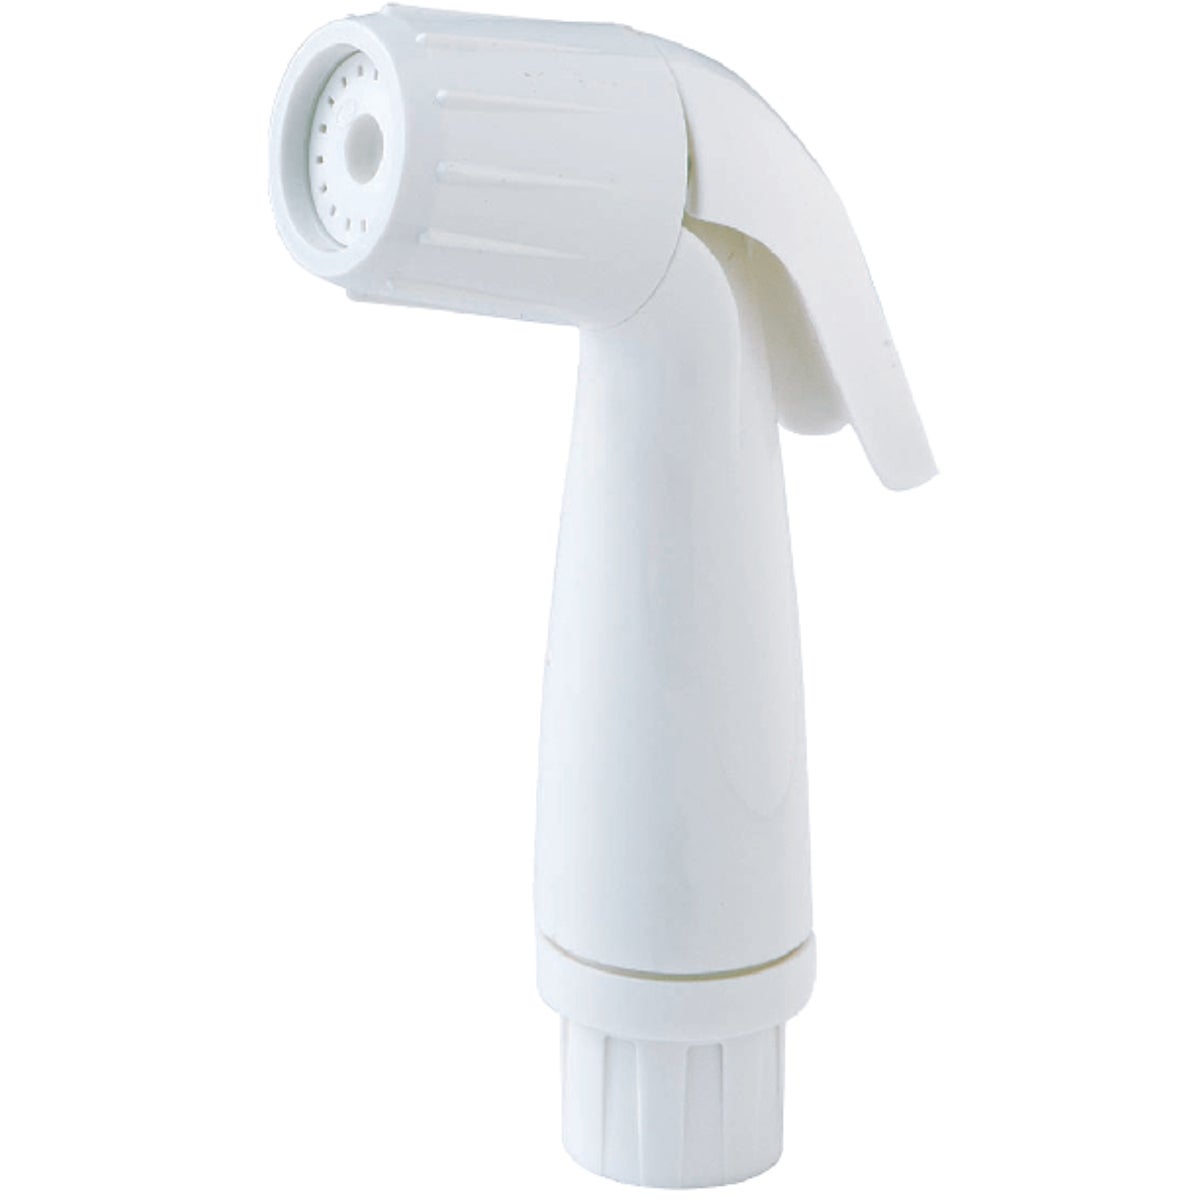 Item 414999, White finish plastic spray head attaches to existing hose to replace any 